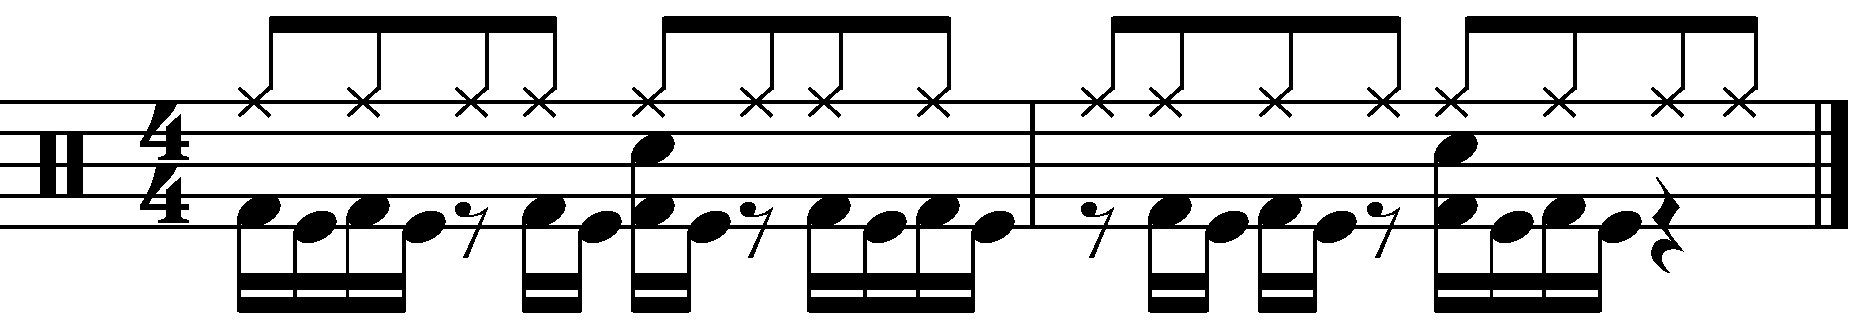 A groove using syncopated double kick placement